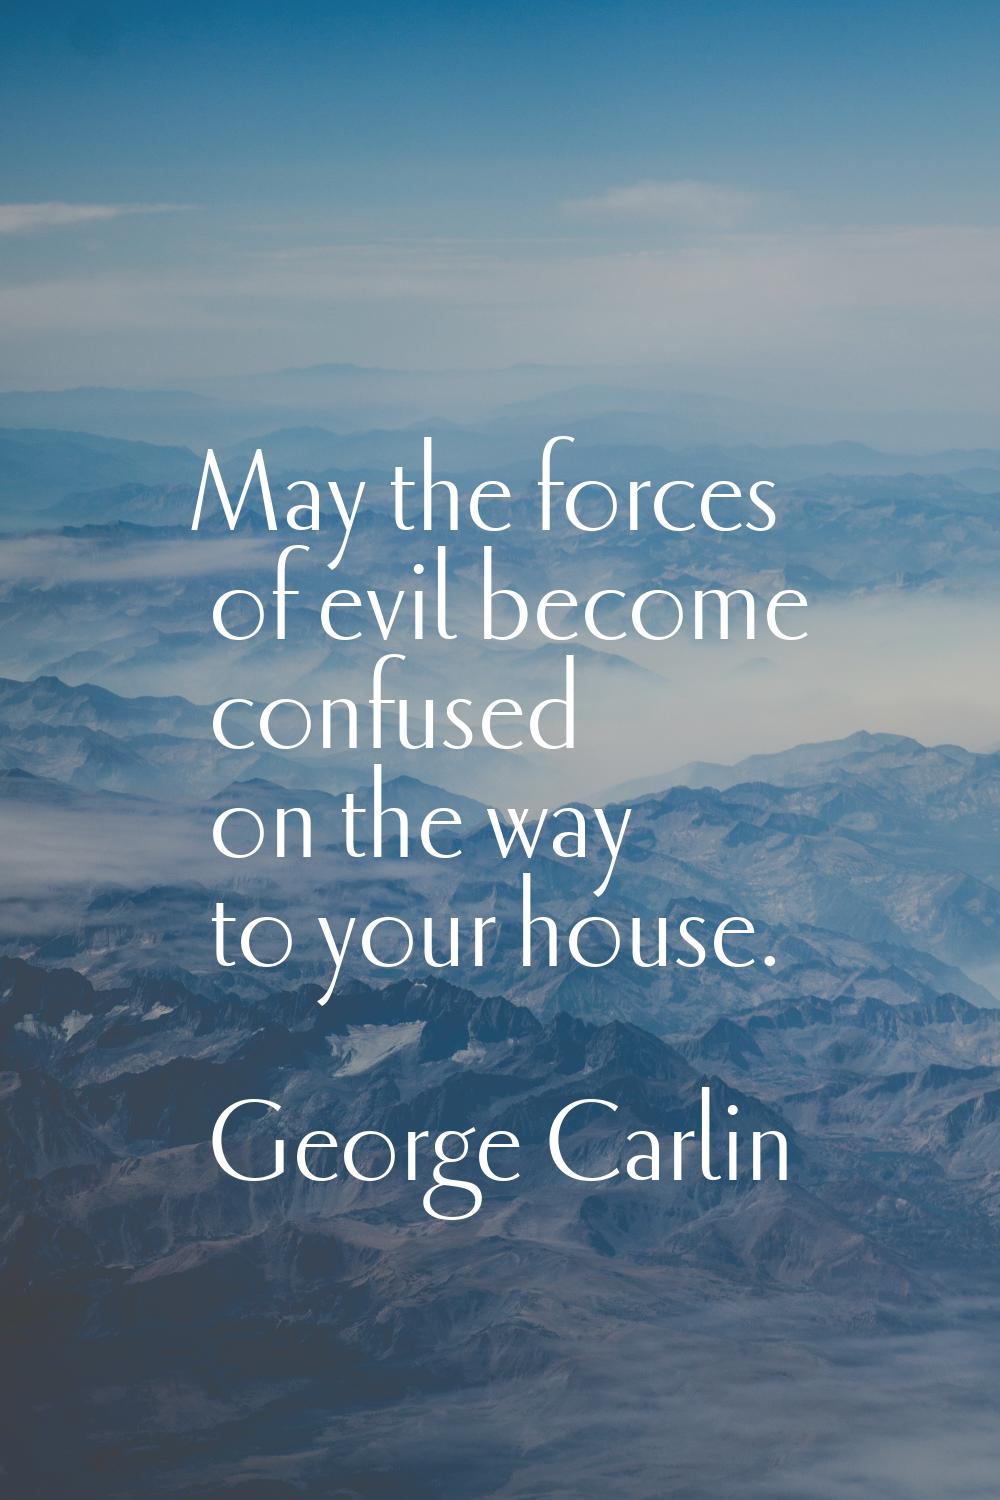 May the forces of evil become confused on the way to your house.